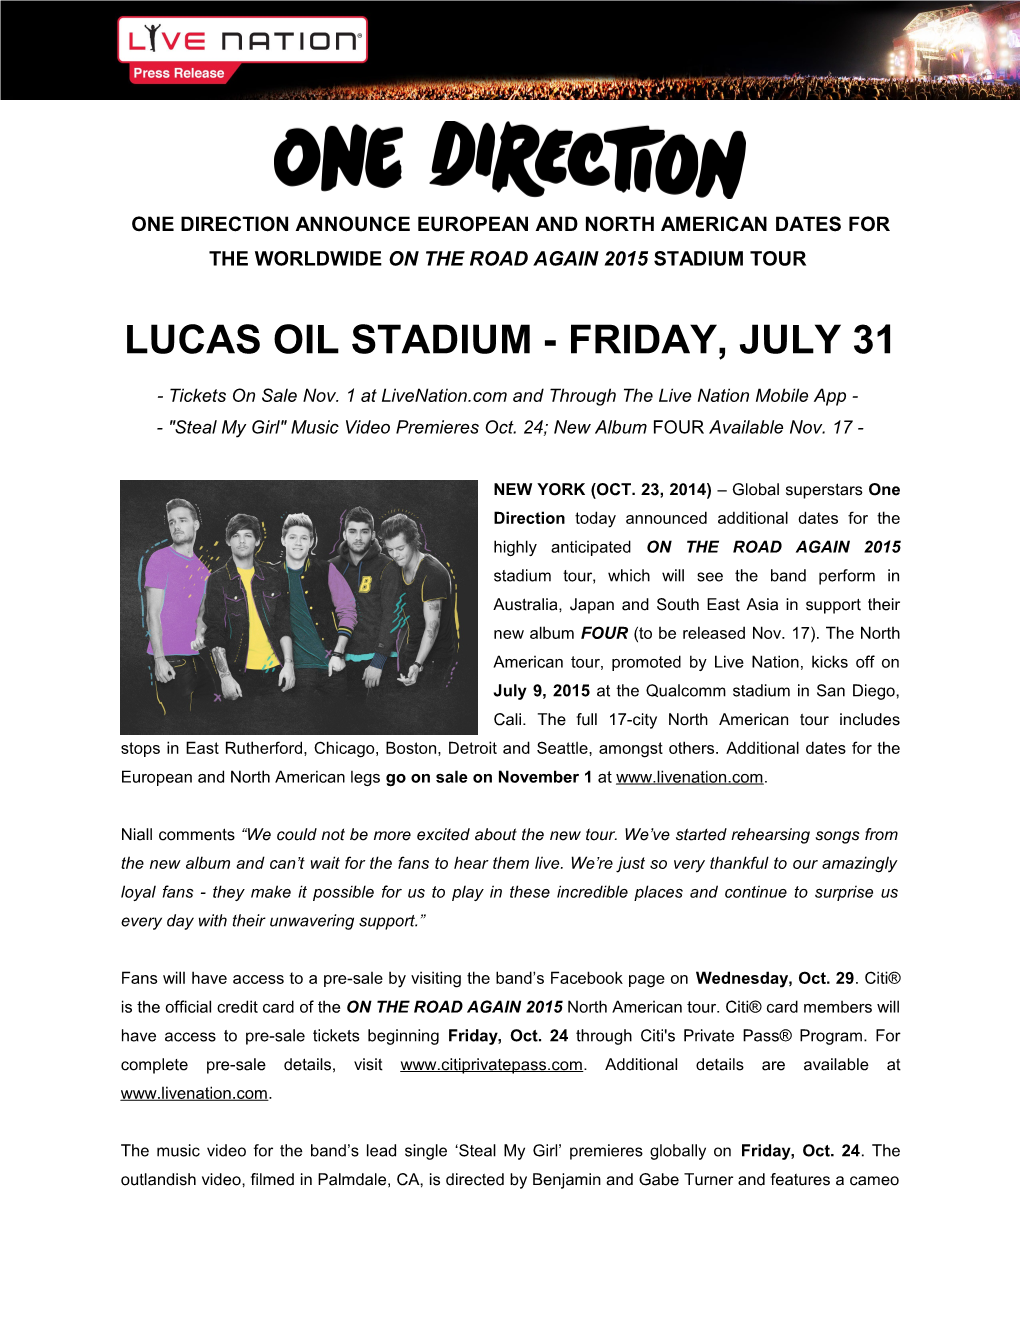 One Direction Announce European and North Americandates for Theworldwide on the Road Again